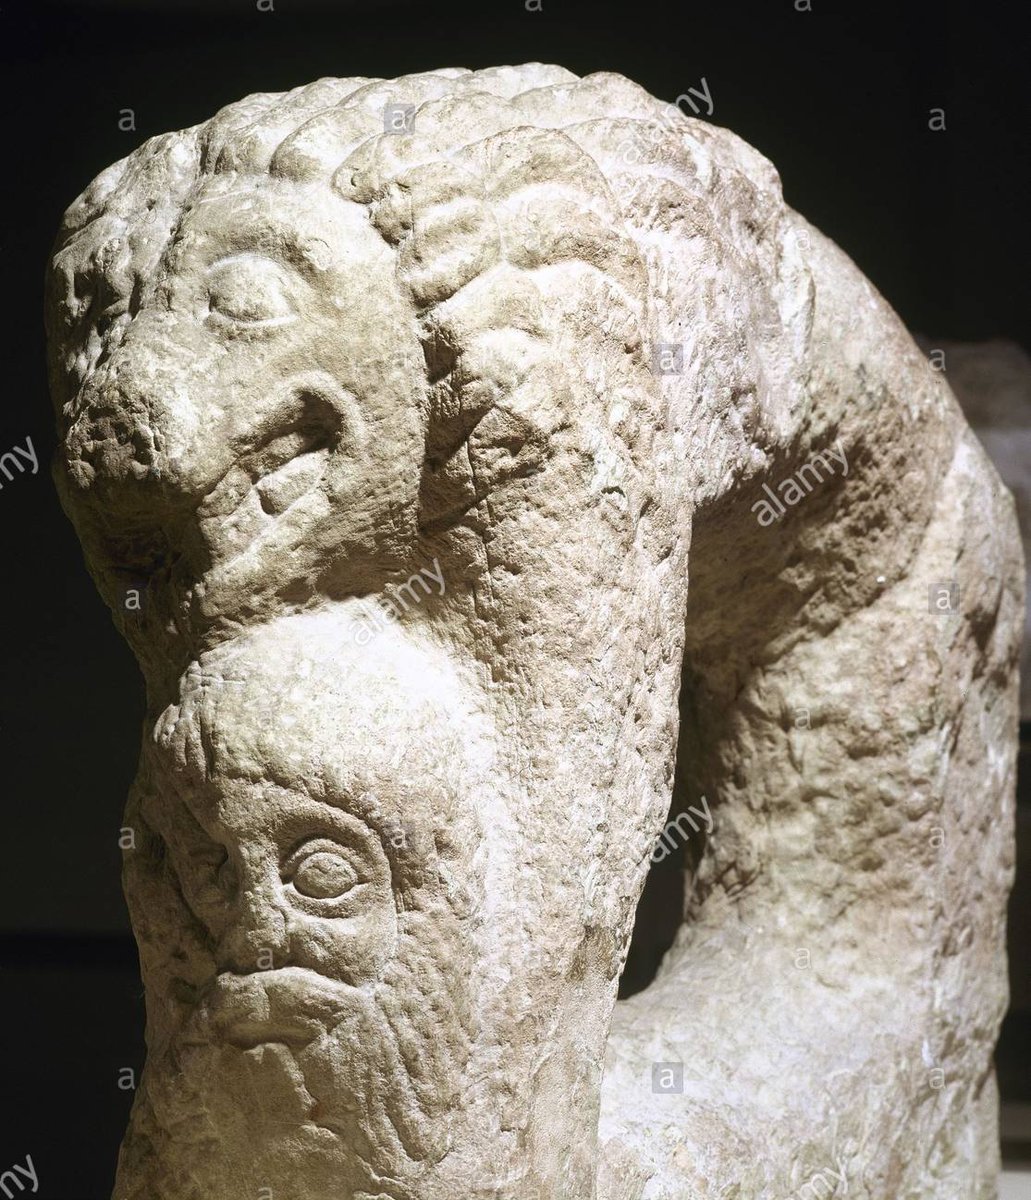 7/ In the Gallaecian Castro Culture sculptures of severed heads were found. In Eastern Iberia, we have the Lion of Bienservida holding a human head, crafted by the Bastetani in 6th century BCE. Lion's paws were found at the end of the Lady of Baza's throne  https://twitter.com/Herminius_Mons/status/1243593996779356160